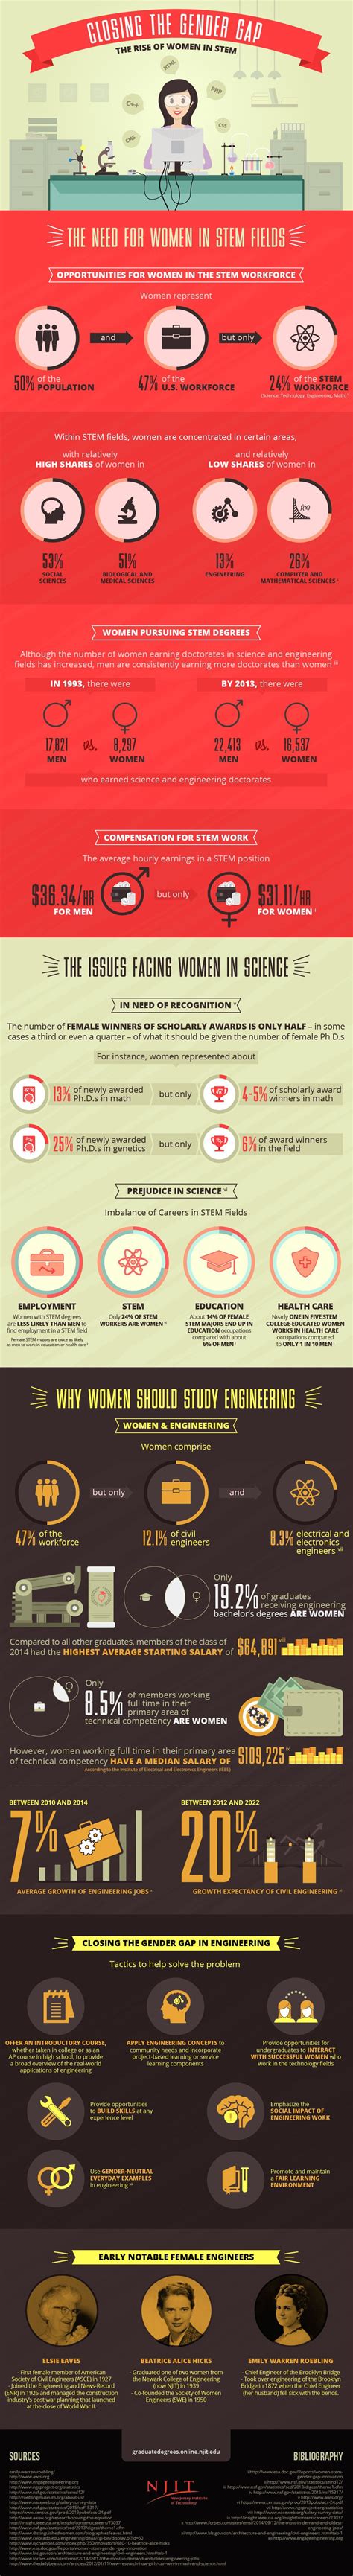 Engineering A Way To Close The Gender Gap In Stem Gender Gap Infographic Educational Infographic